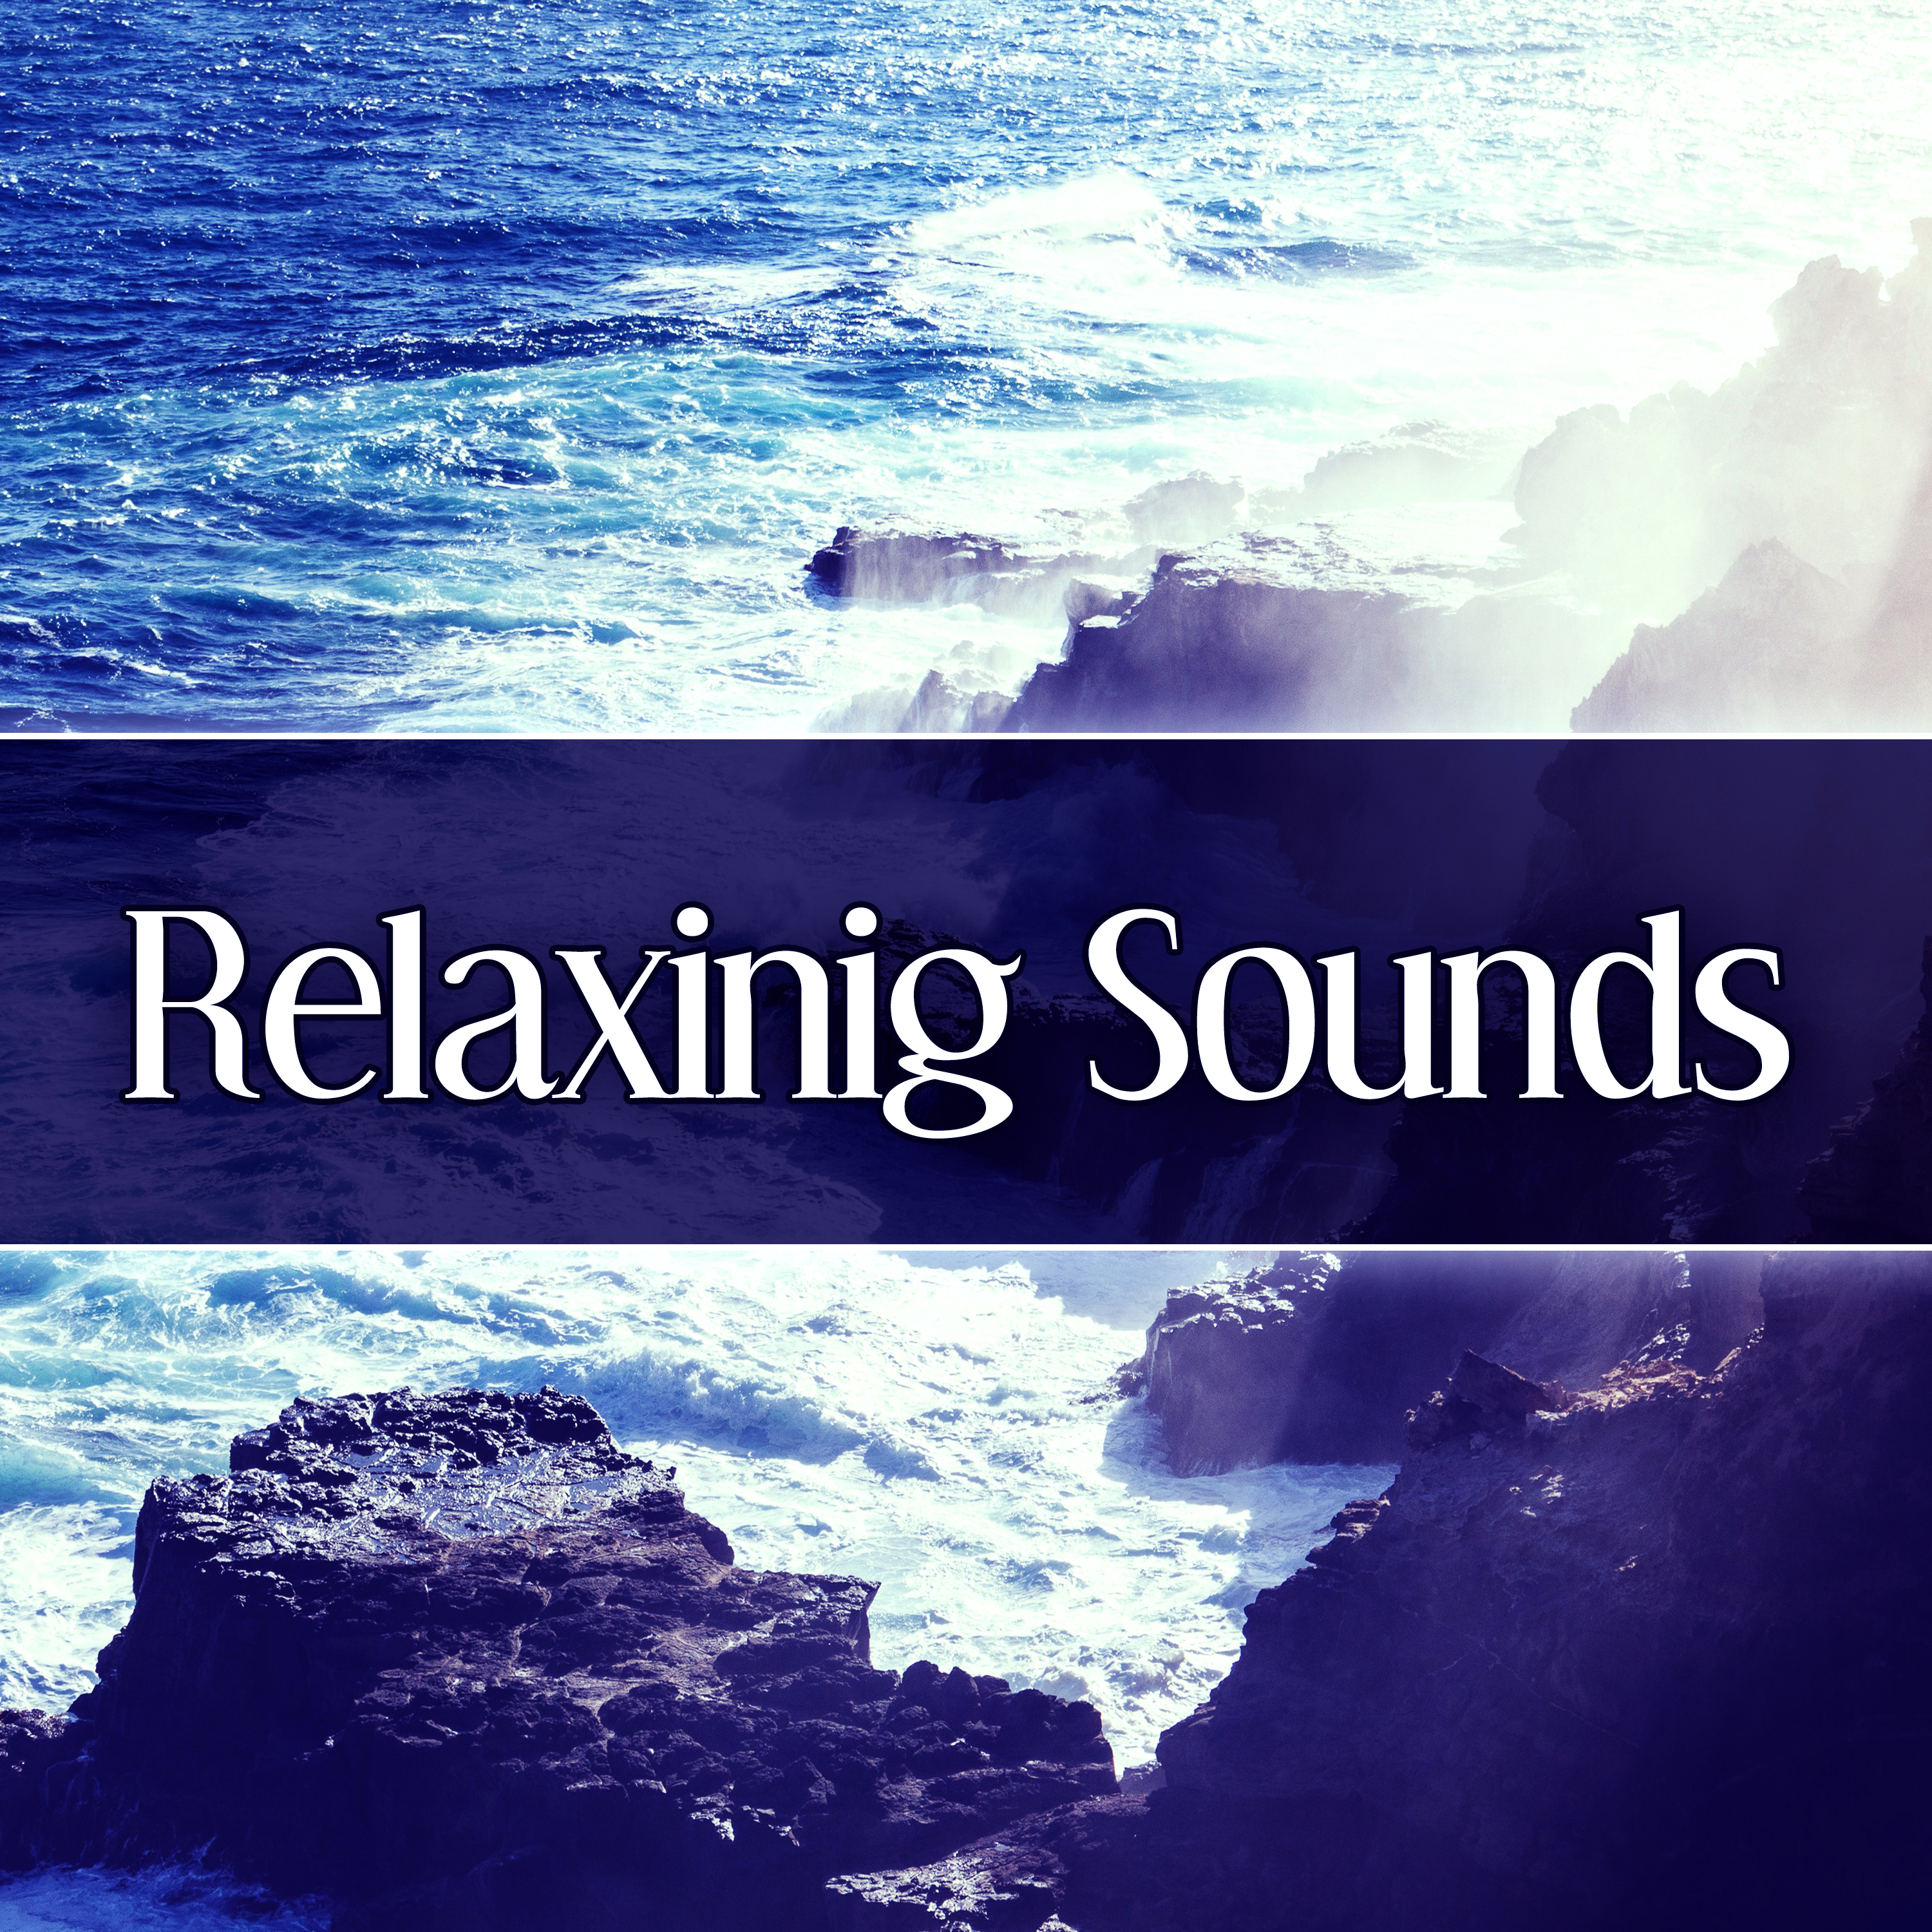 Relaxinig Sounds – Most Popular Soothing Sounds for Relax